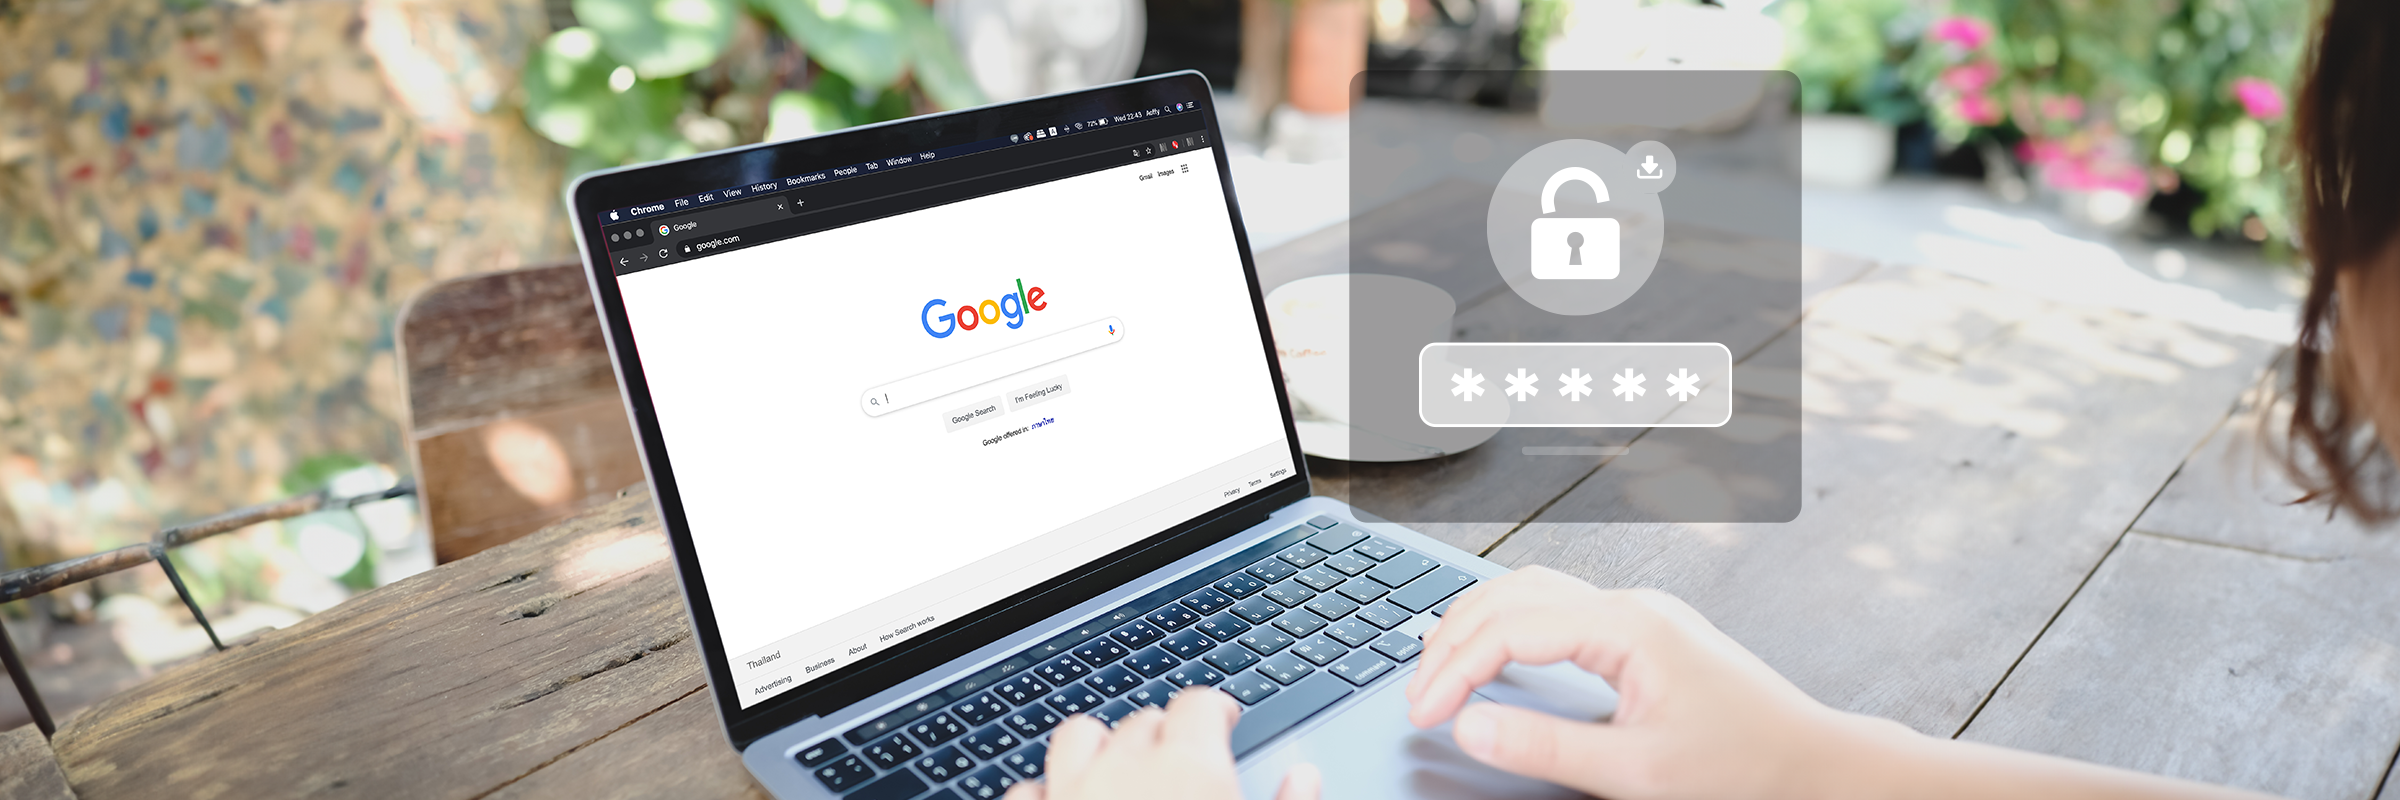 How to export passwords from Chrome Password Manager?